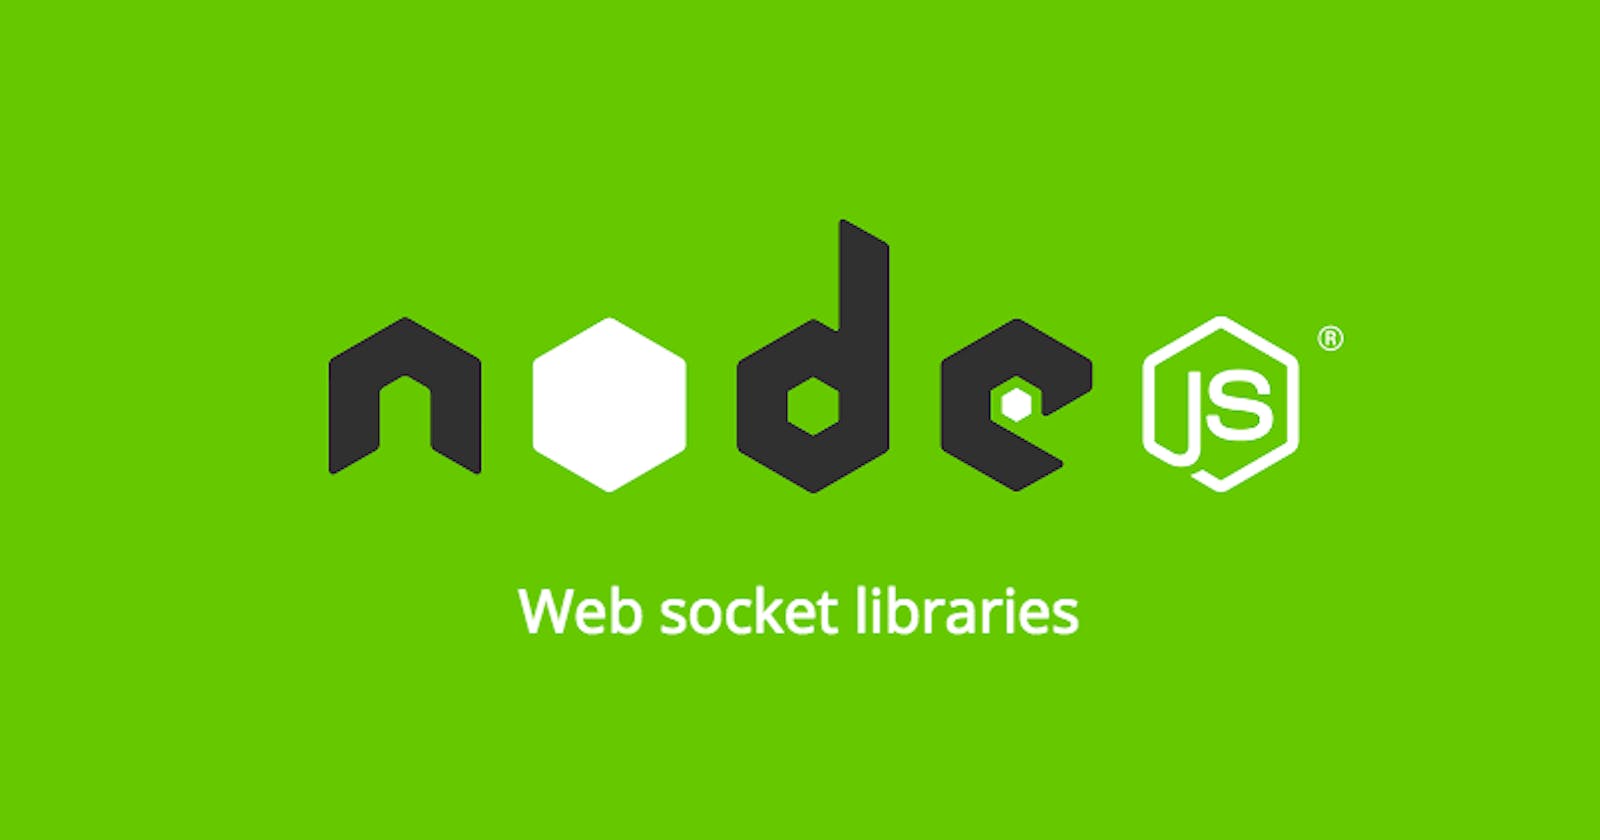 5 WebSocket Libraries to Consider in 2022